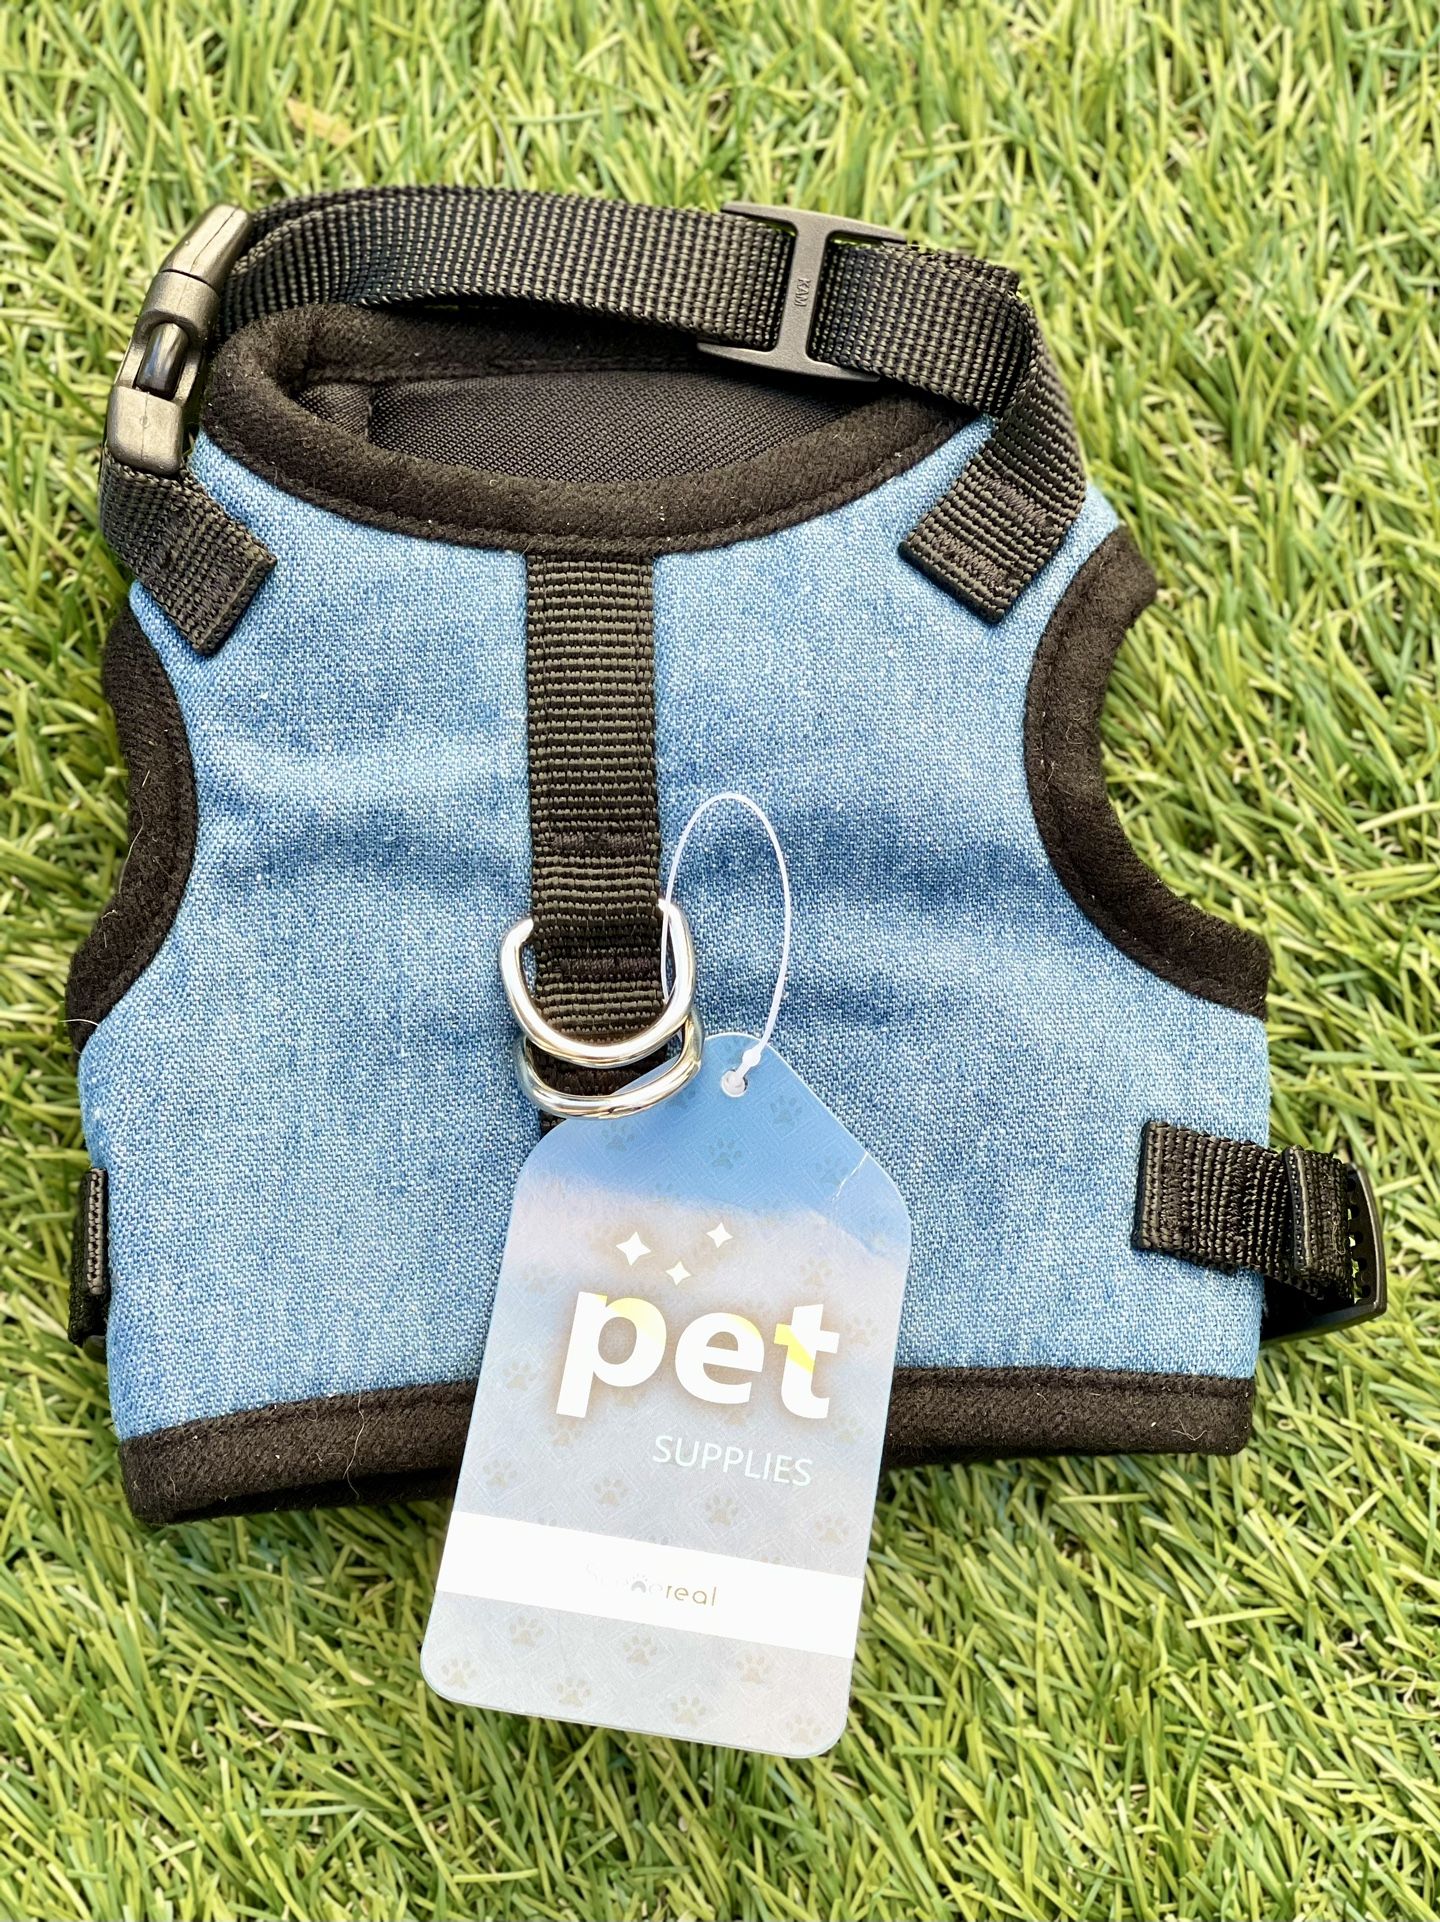 New Blue Dog/Cat Harness With Web Leashes